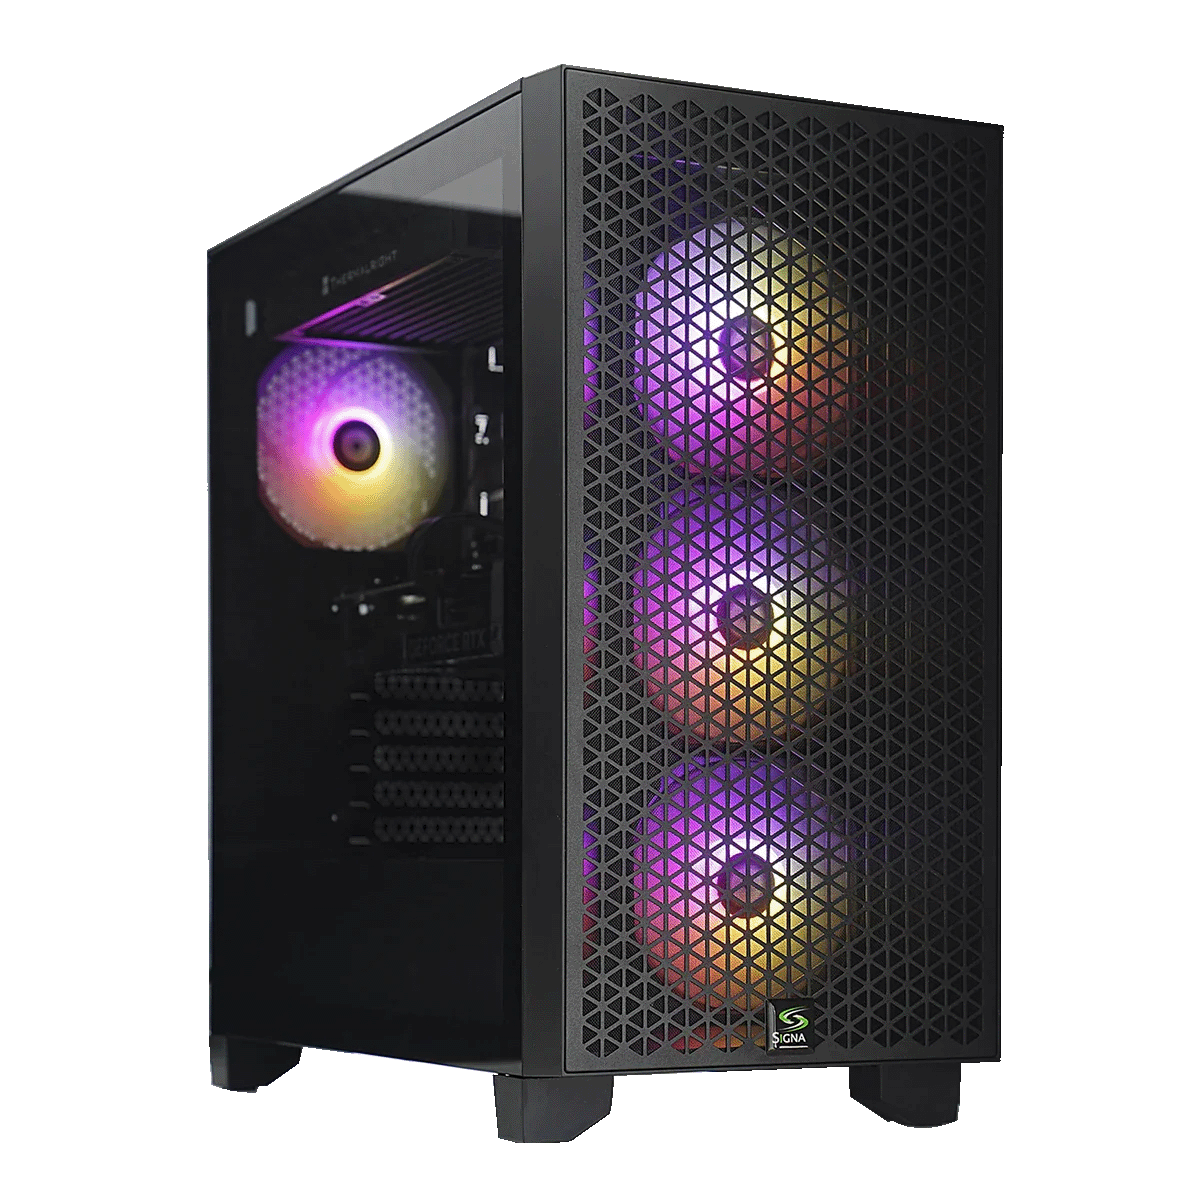 *ON SALE TILL JULY 31st* Signa Extreme Custom Built Gaming PC with 360mm AIO Liquid Cooling